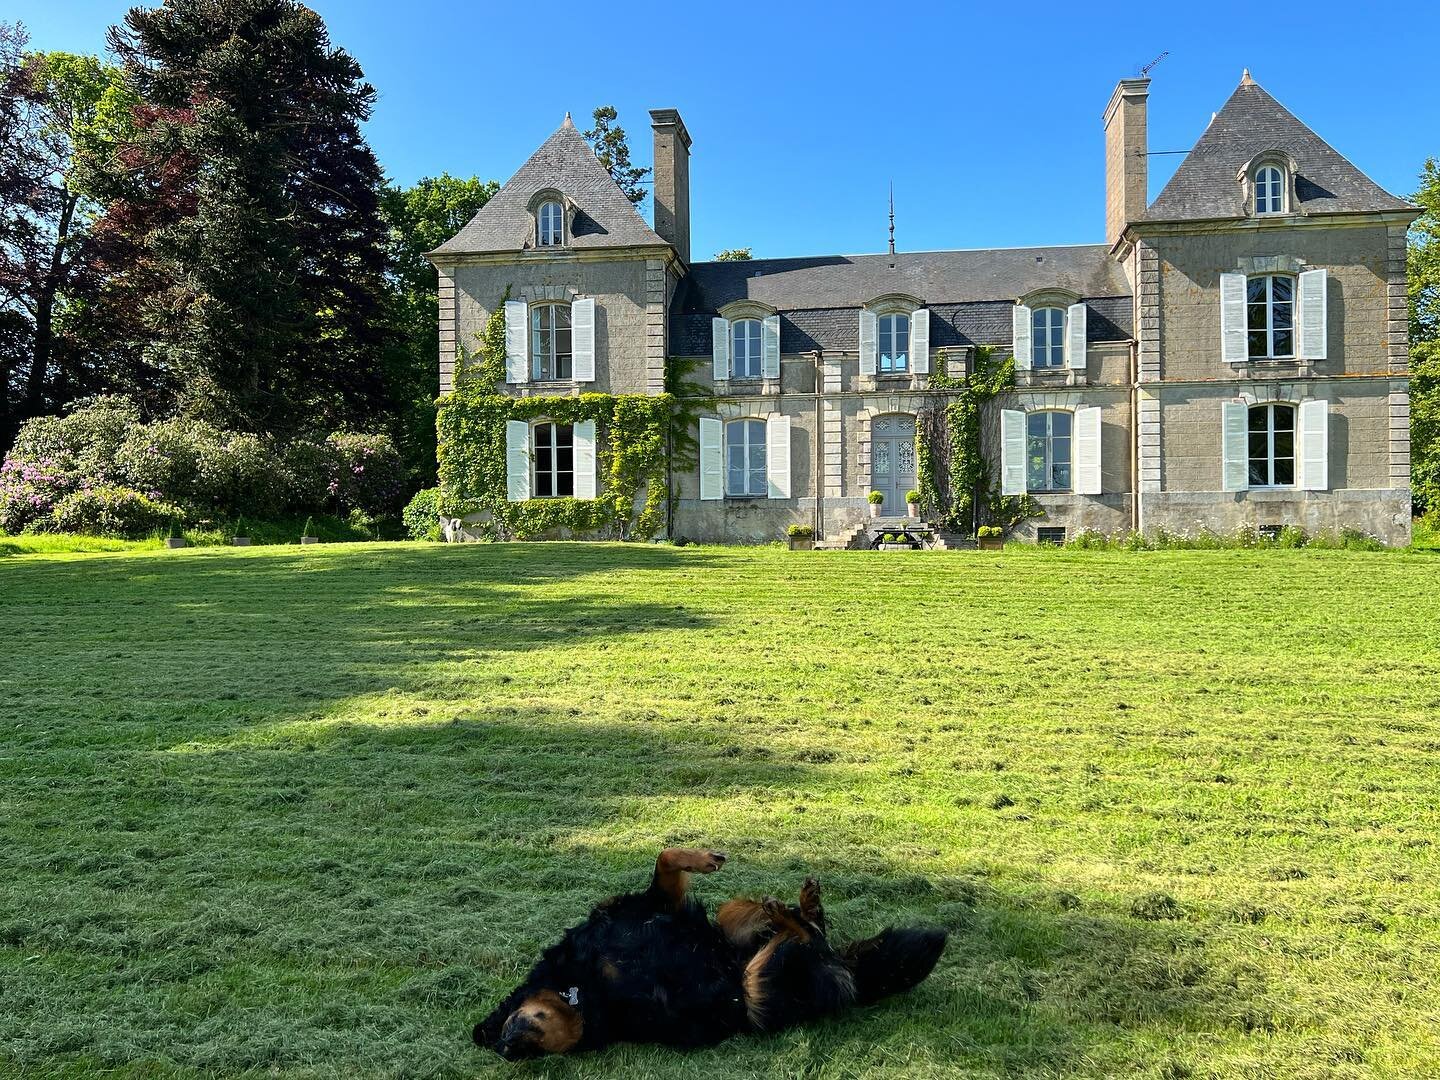 Enzo rolling in the freshly cut grass on a perfectly spectacular day. It certainly smells much better than his usual preference: Fox poop 🦊
.
.
.
#dogsofinstagram #rescuedog #tripoddog #chateau #chateaurestoration #cotesdarmor #bretagne #fox #ourfre